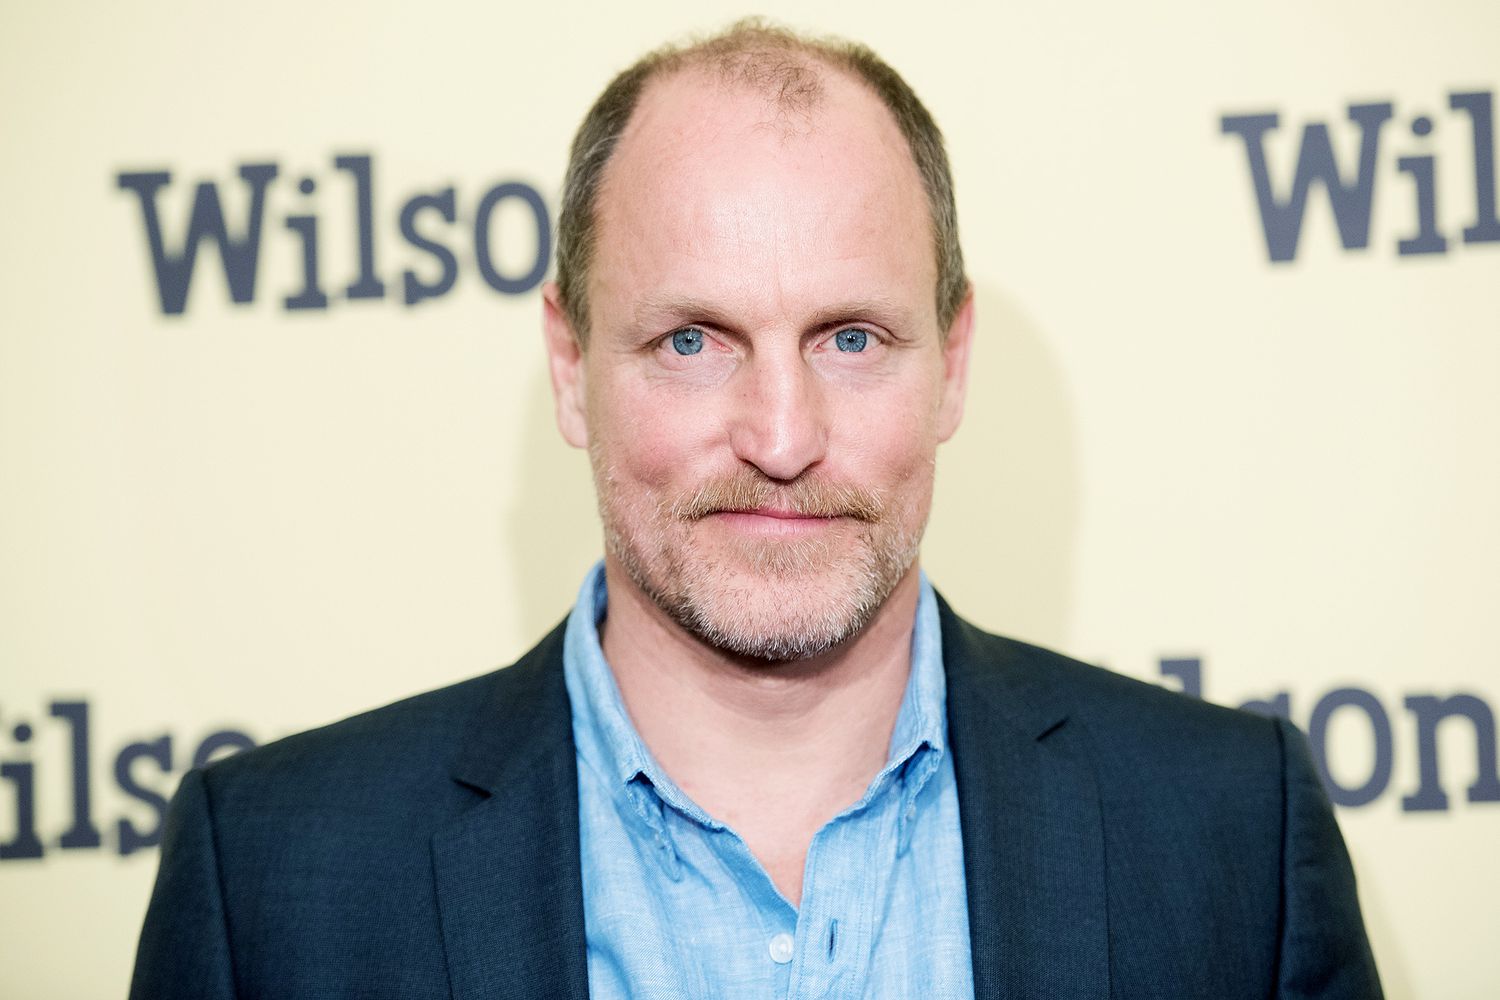 Woody Harrelson Biography: Age, Height, Net Worth, Movies, Wife, Wiki, Instagram